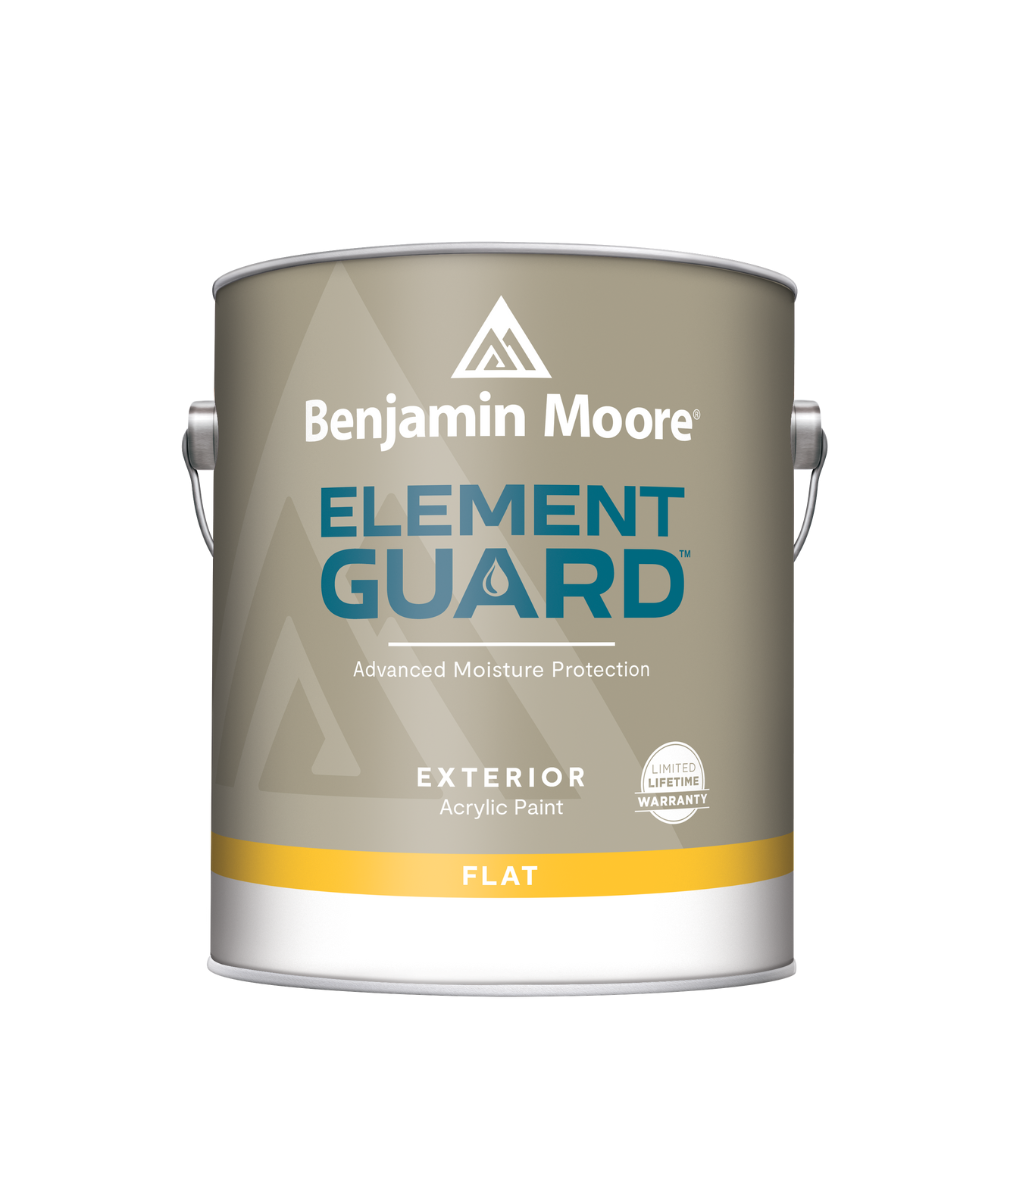 Benjamin Moore's Element Guard Exterior Flat Paint with Advanced Moisture Protection. Available at JC Licht in Chicago, IL.